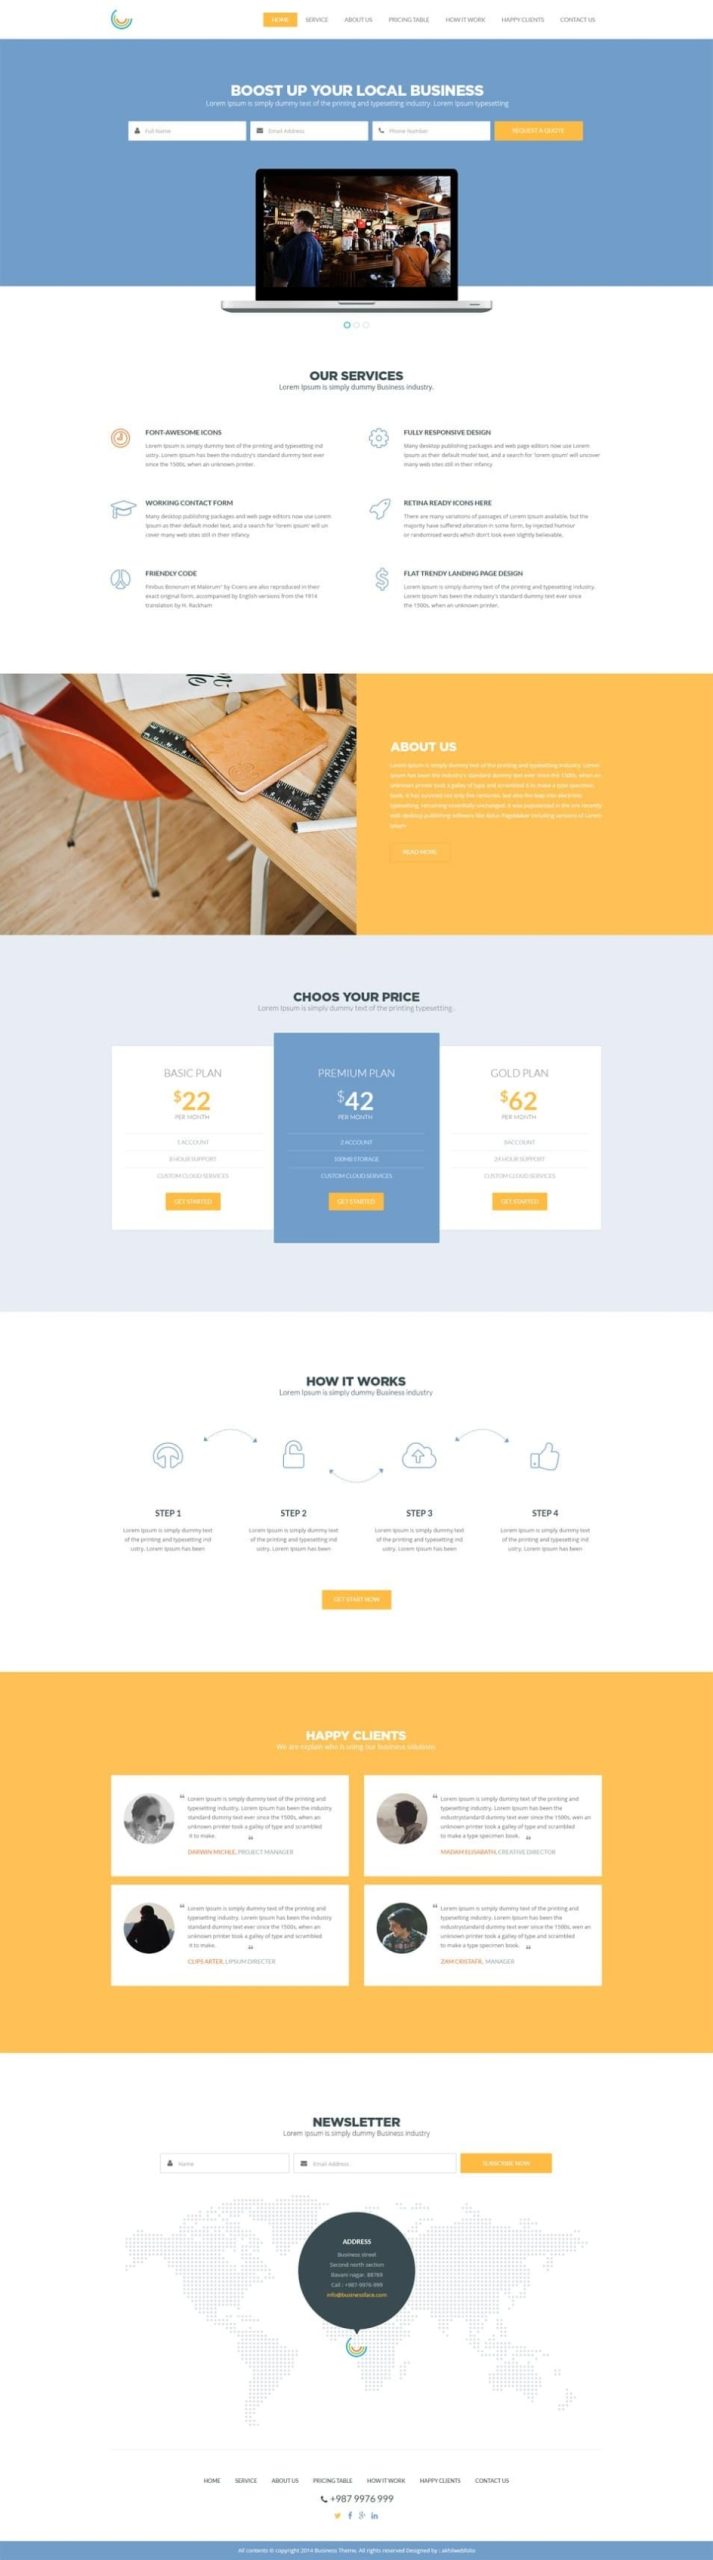 Free Corporate And Business Web Templates Psd In Business Website Templates Psd Free Download